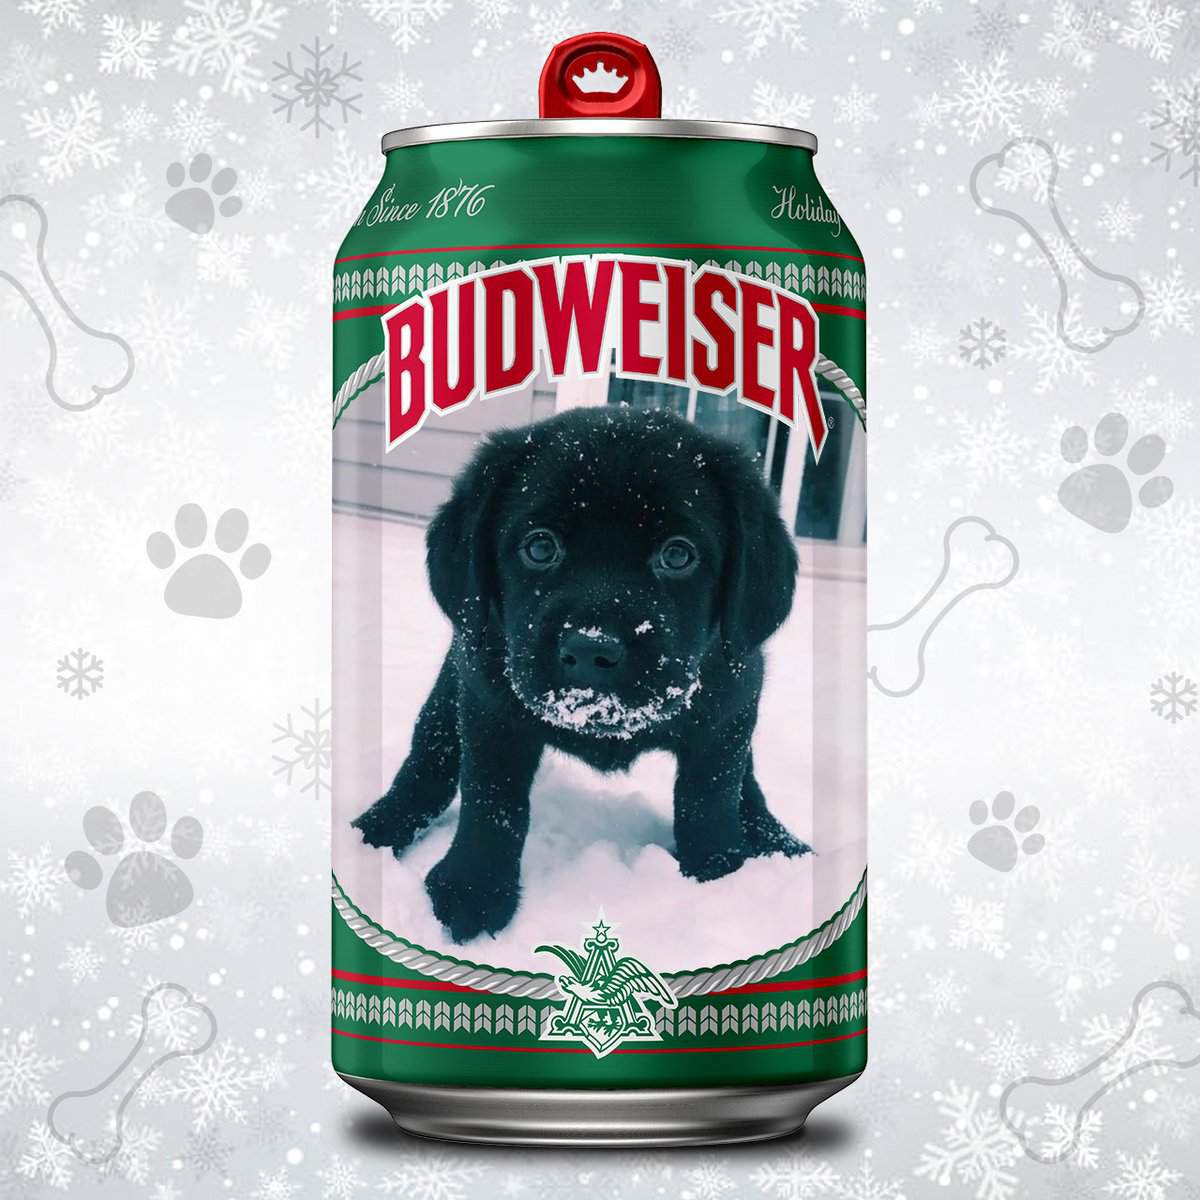 Want your dog on a Budweiser can? Here’s how to make your wish come true